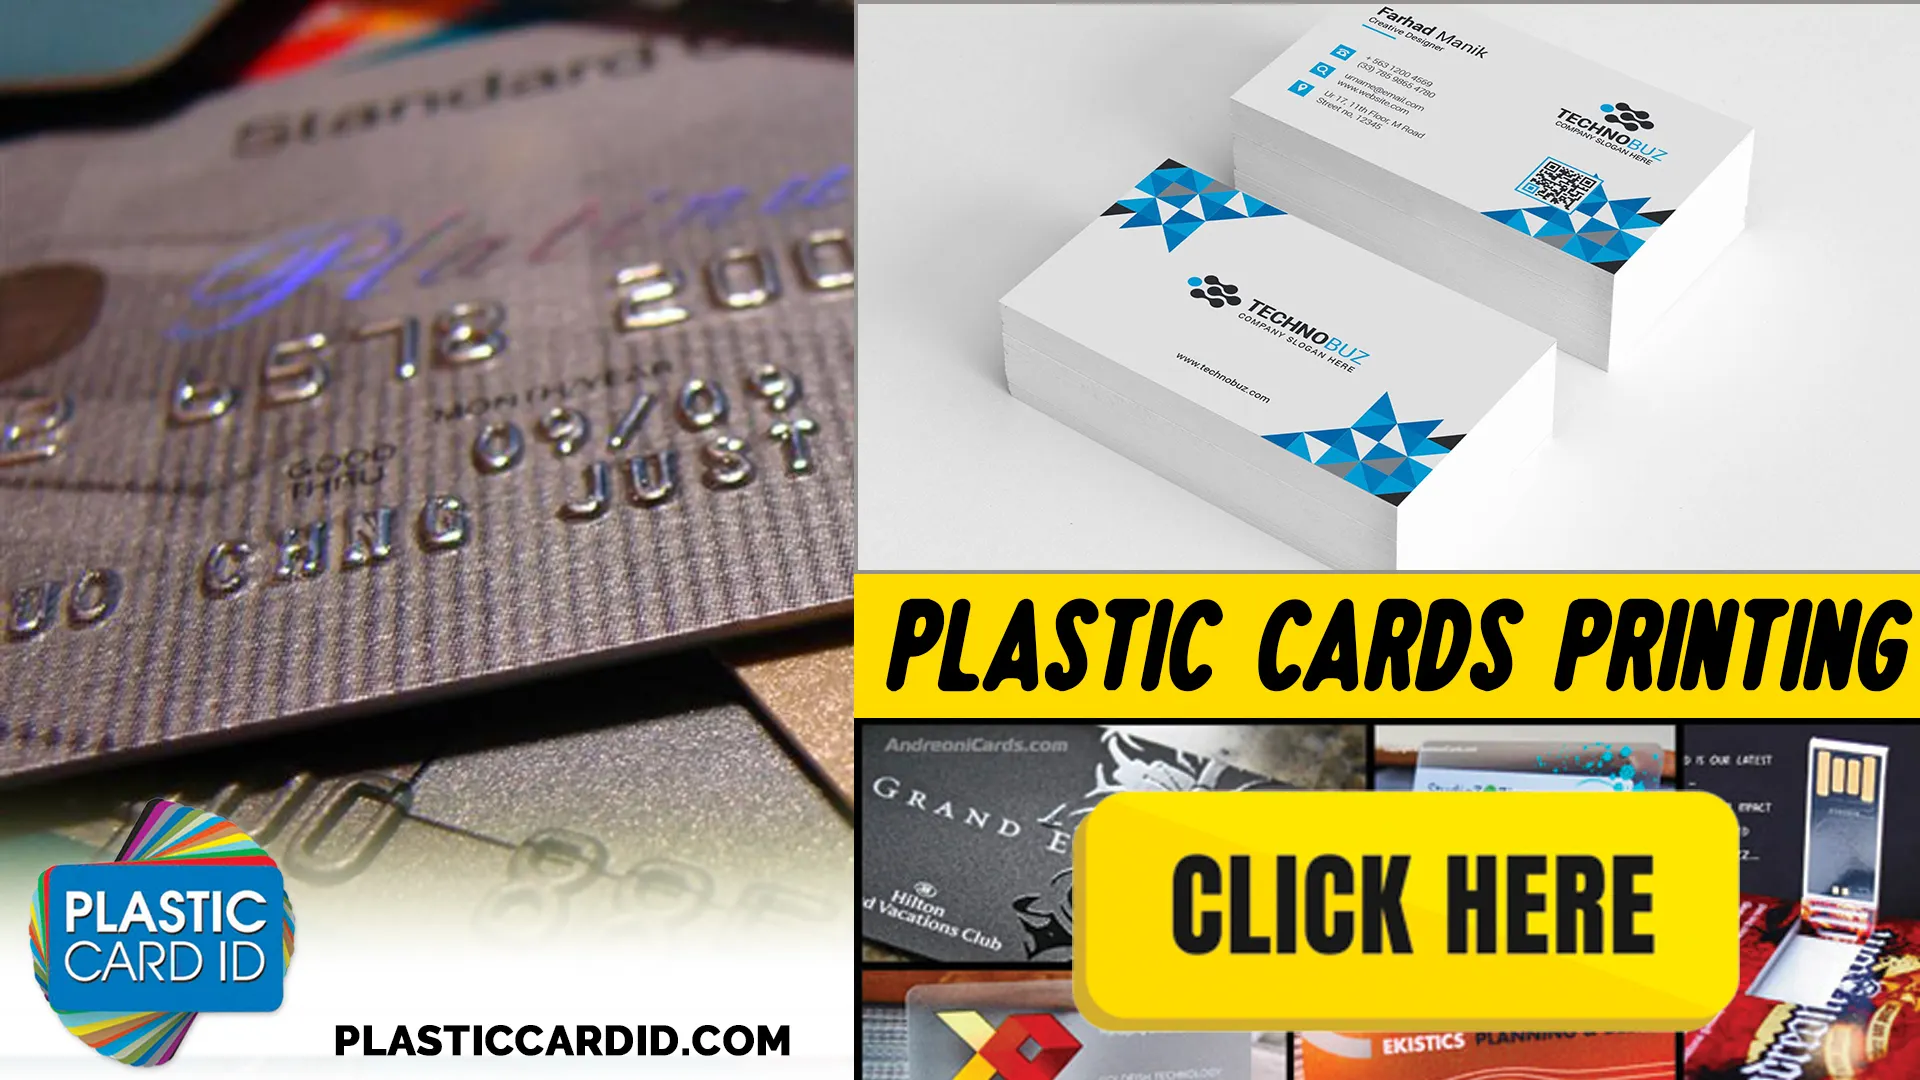 The Global Standard of Excellence Plastic Card ID
 Upholds